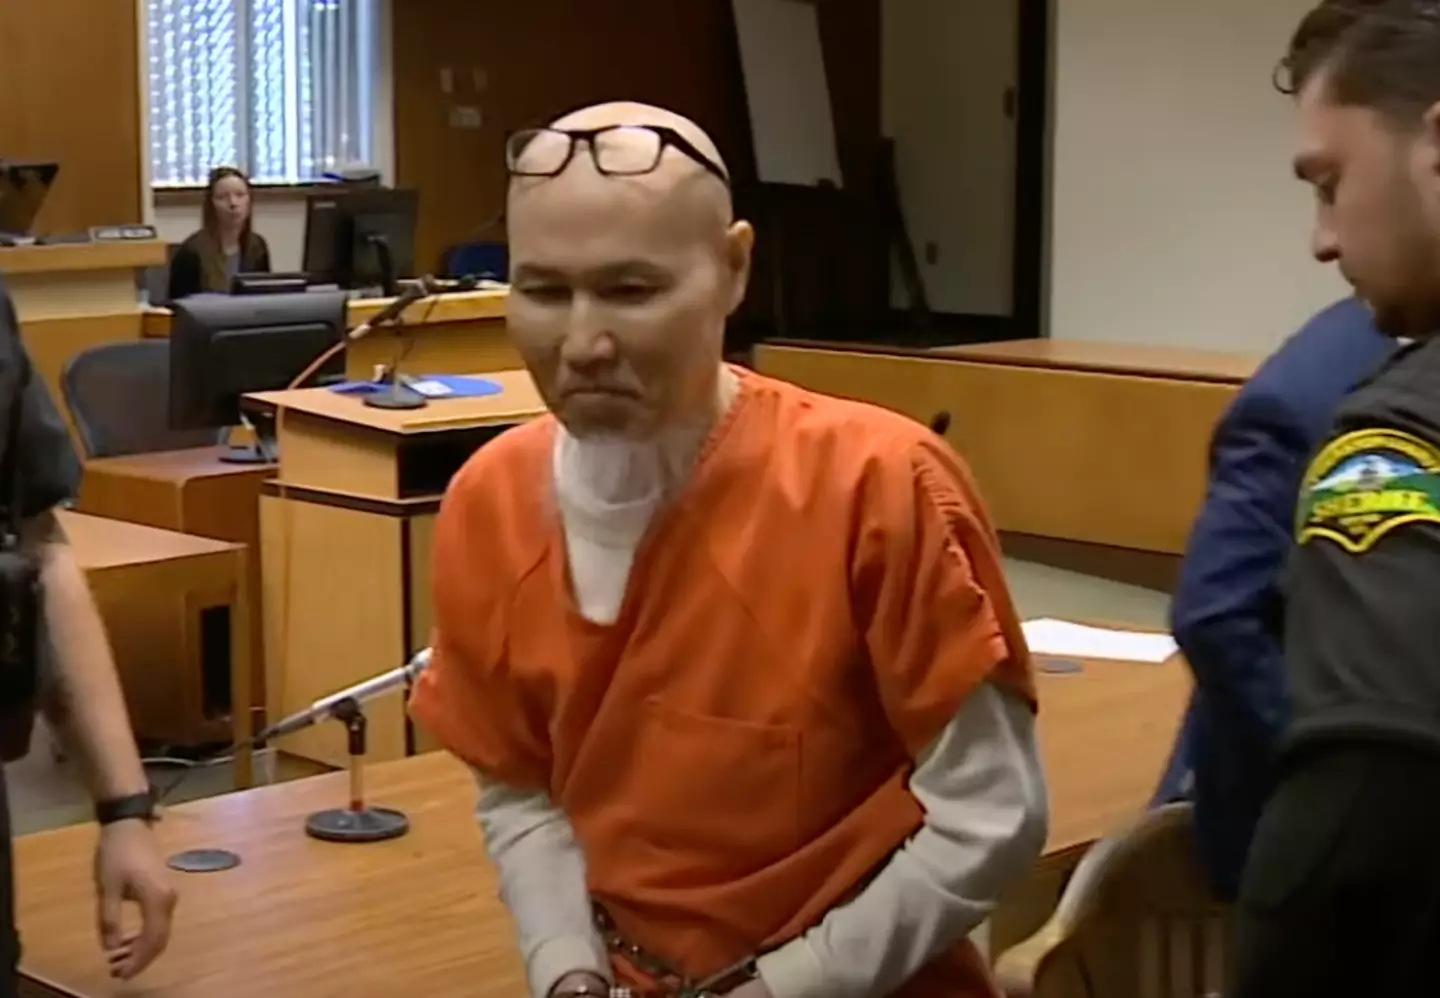 Chae Kyong An has been sentenced to over 13 years in prison. (KING 5 Seattle)